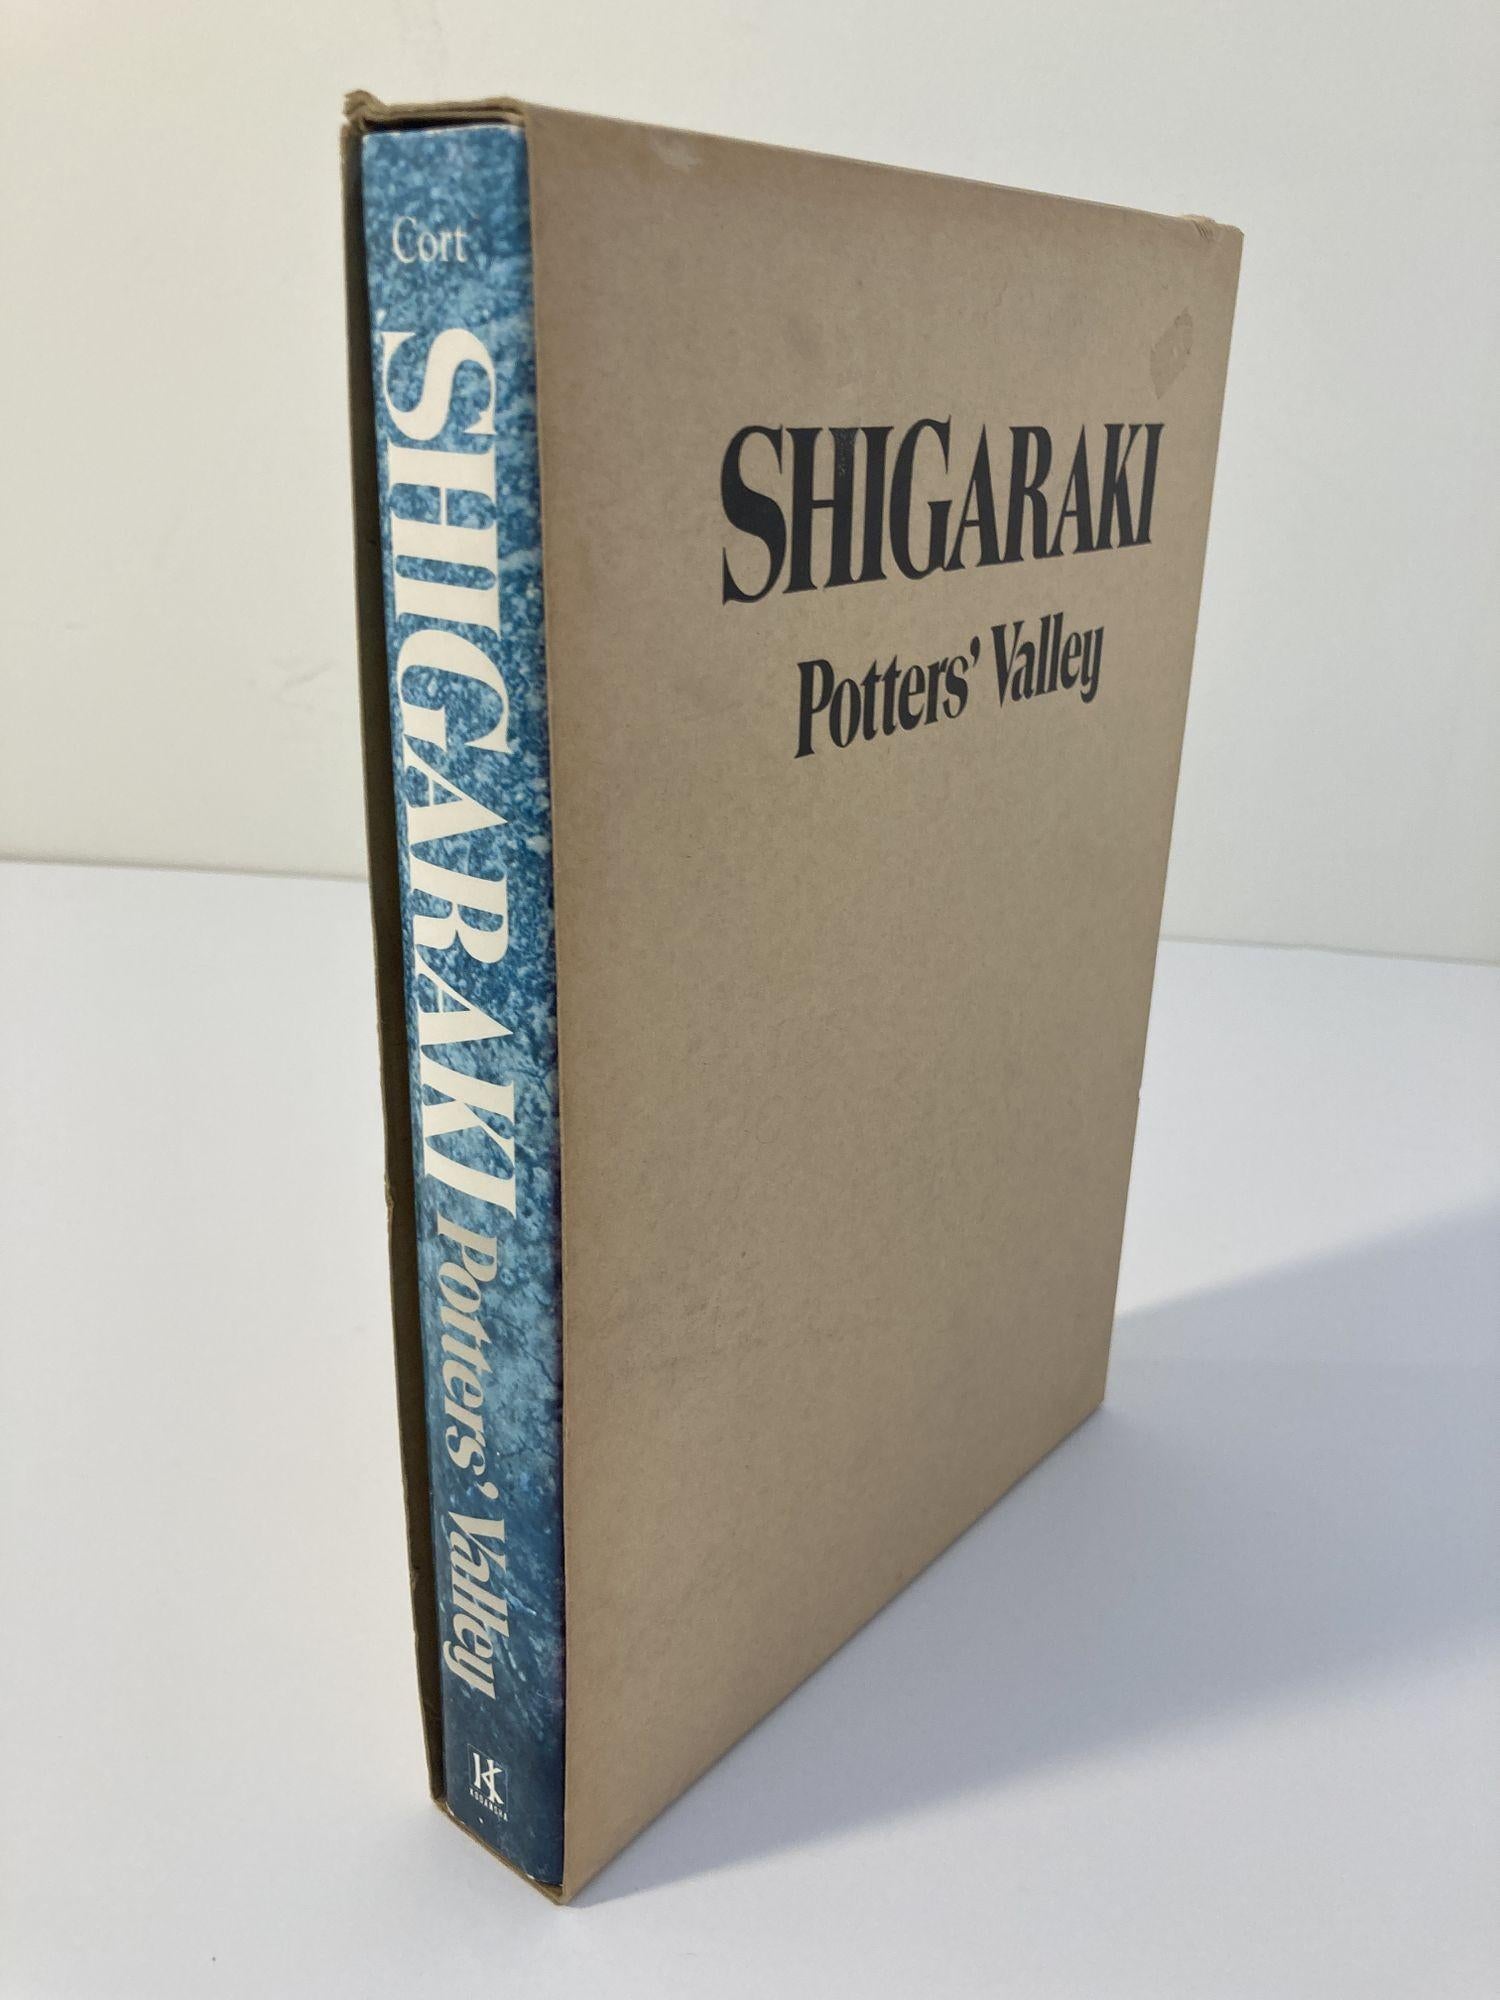 Folk Art Shigaraki the Potters' Valley 1st Edition 1979 Japan Hardcover Book by Louise Al For Sale